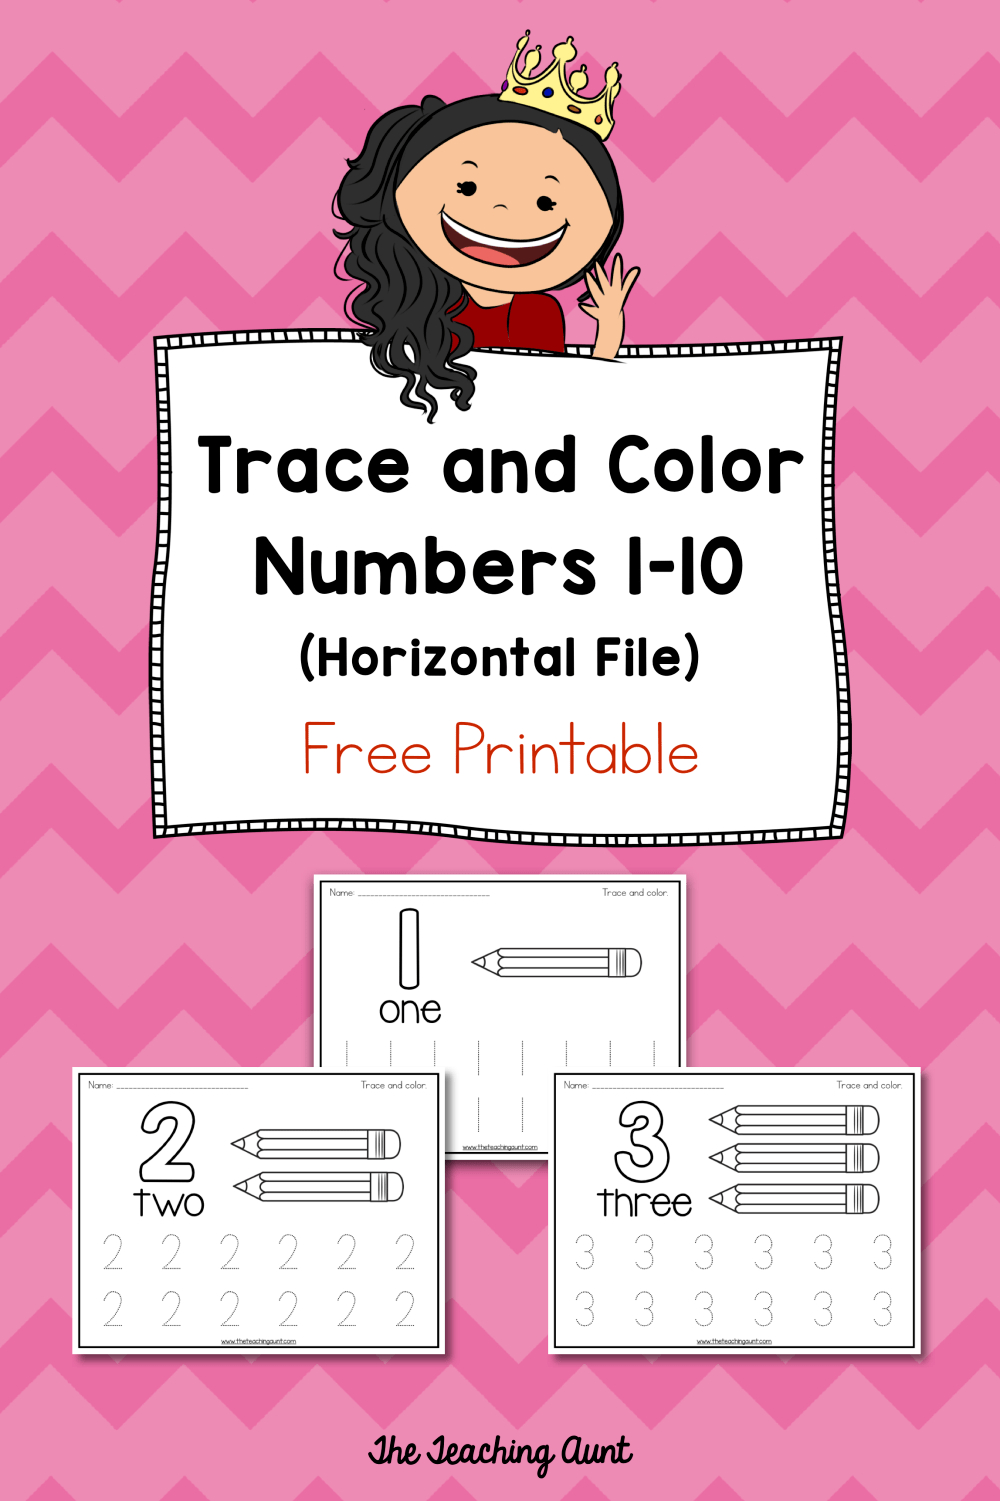 Trace And Color Number Pages Free Printable | Daycare Organization - Free Printable Learning Pages